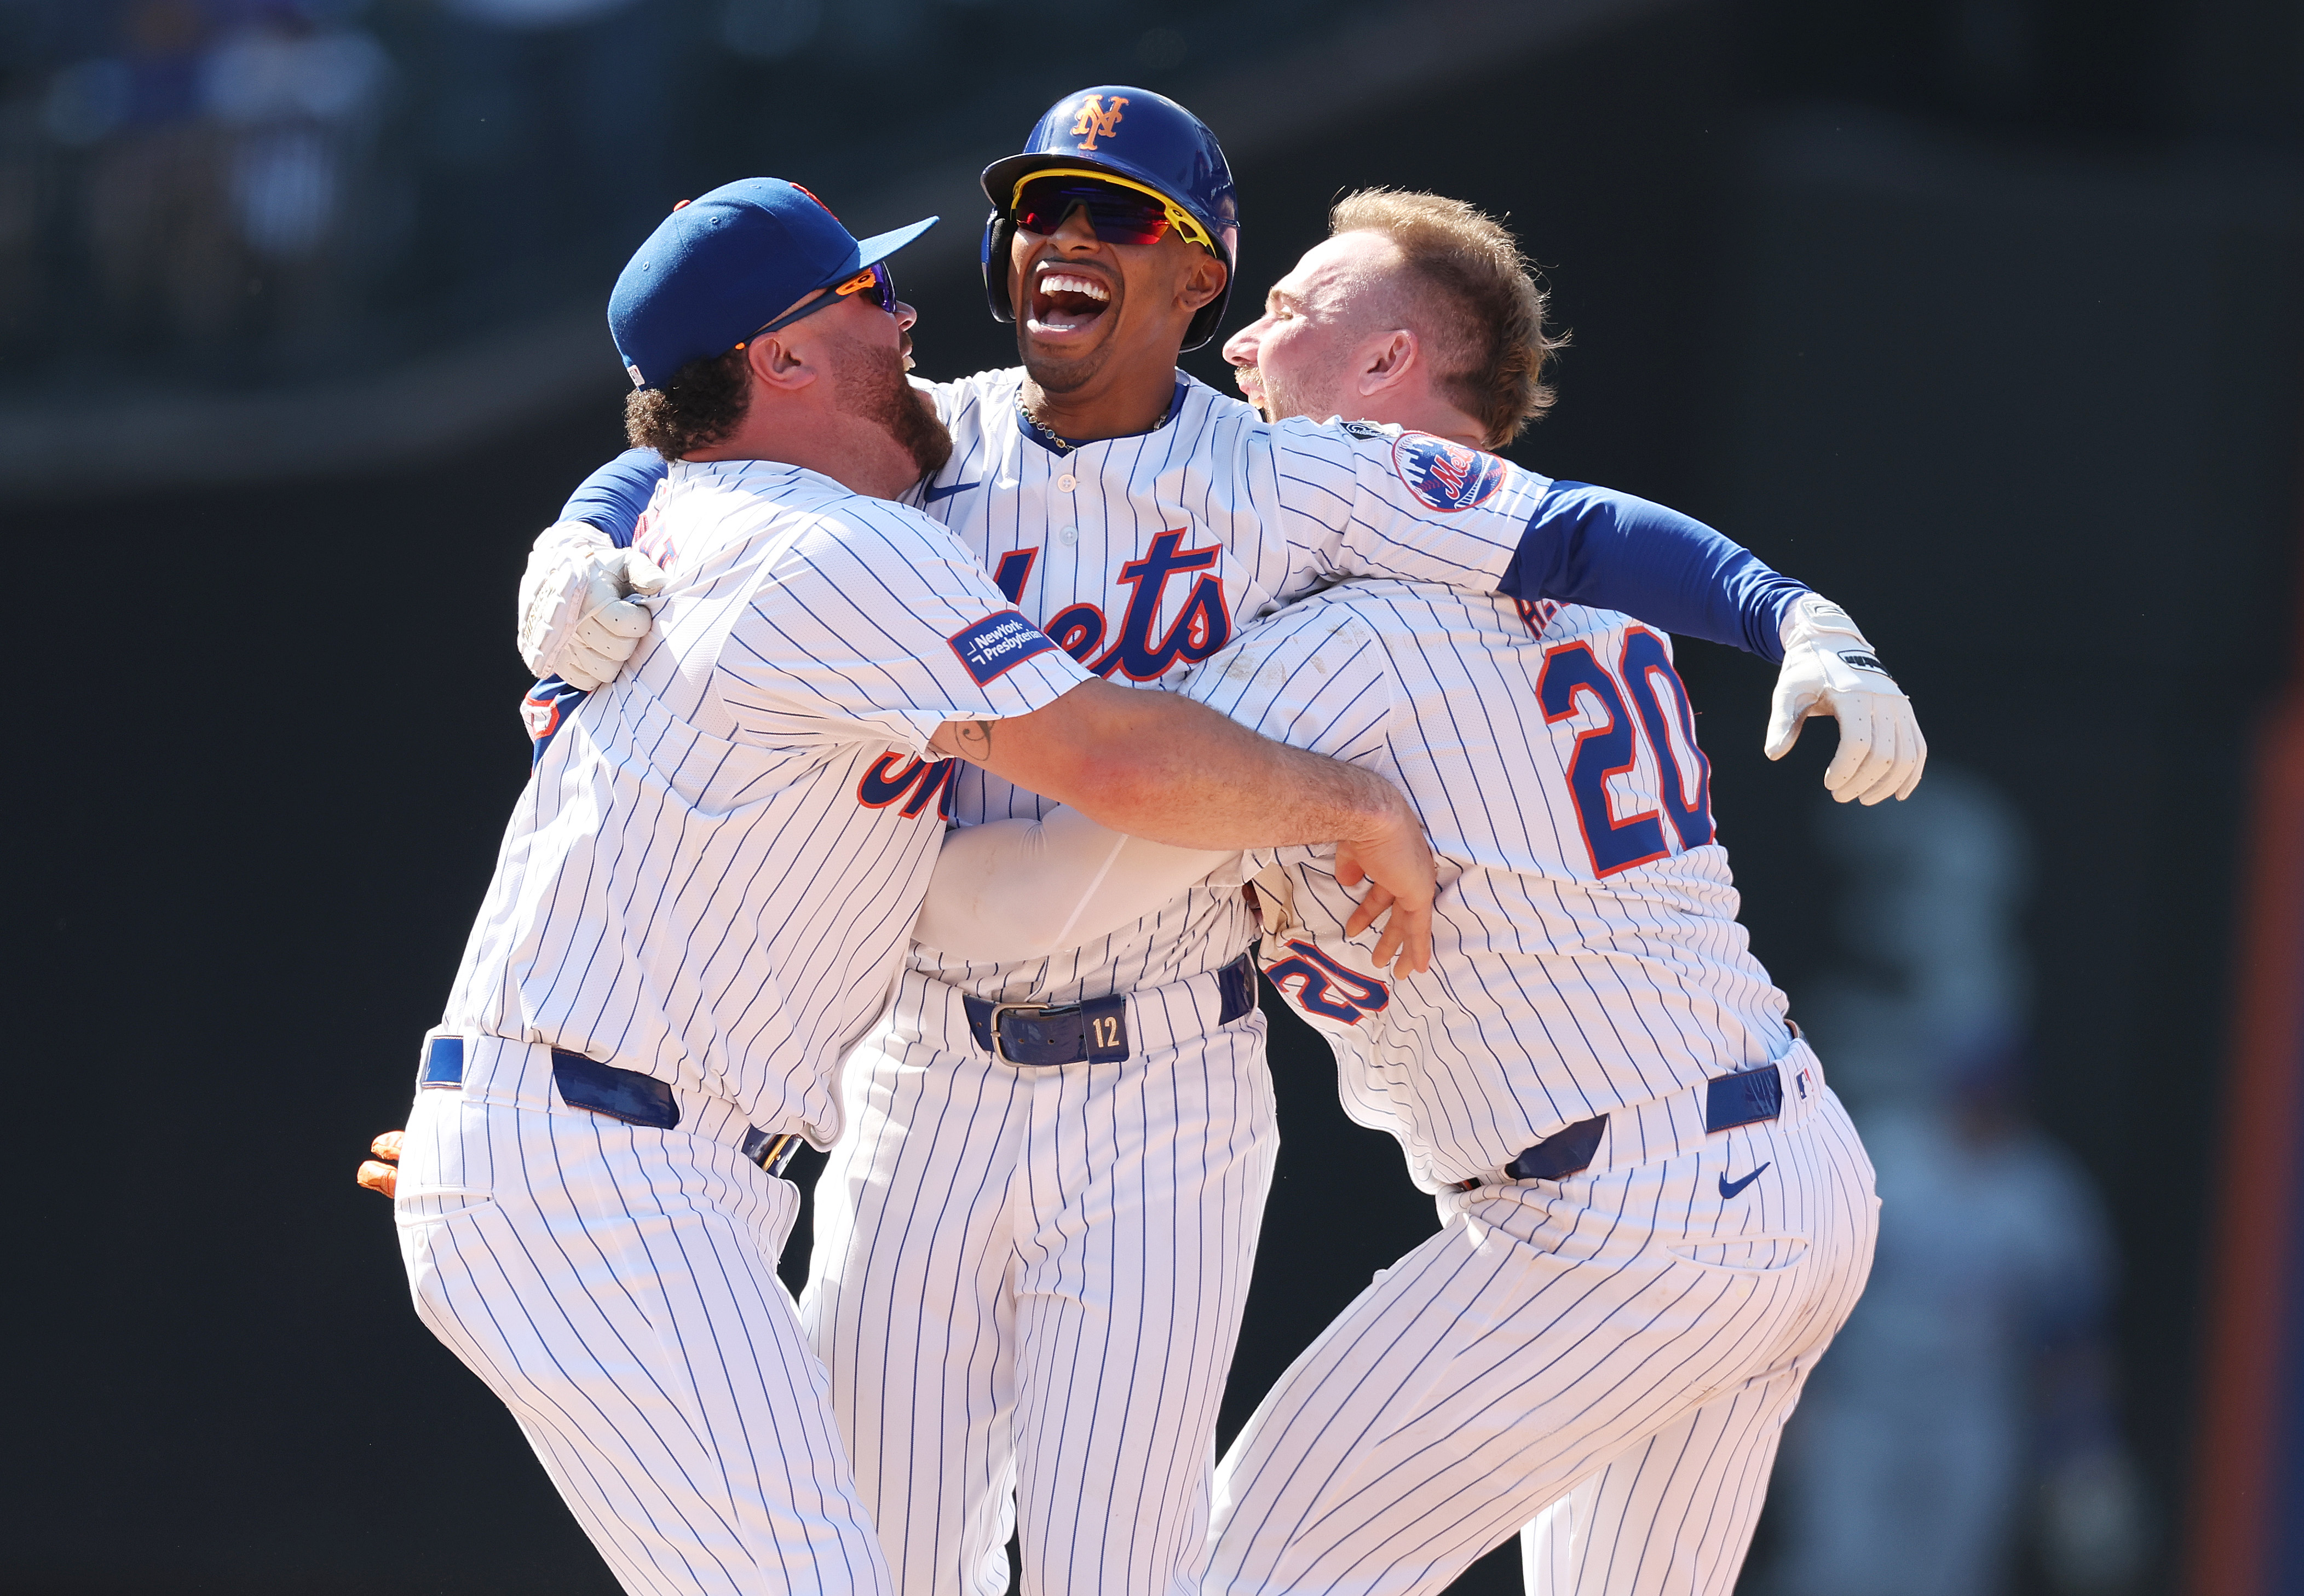 Francisco Lindor celebrating with DJ Stewart and Pete Alonso, all of whom are in white Mets jerseys with blue lettering and blue pinstripes.